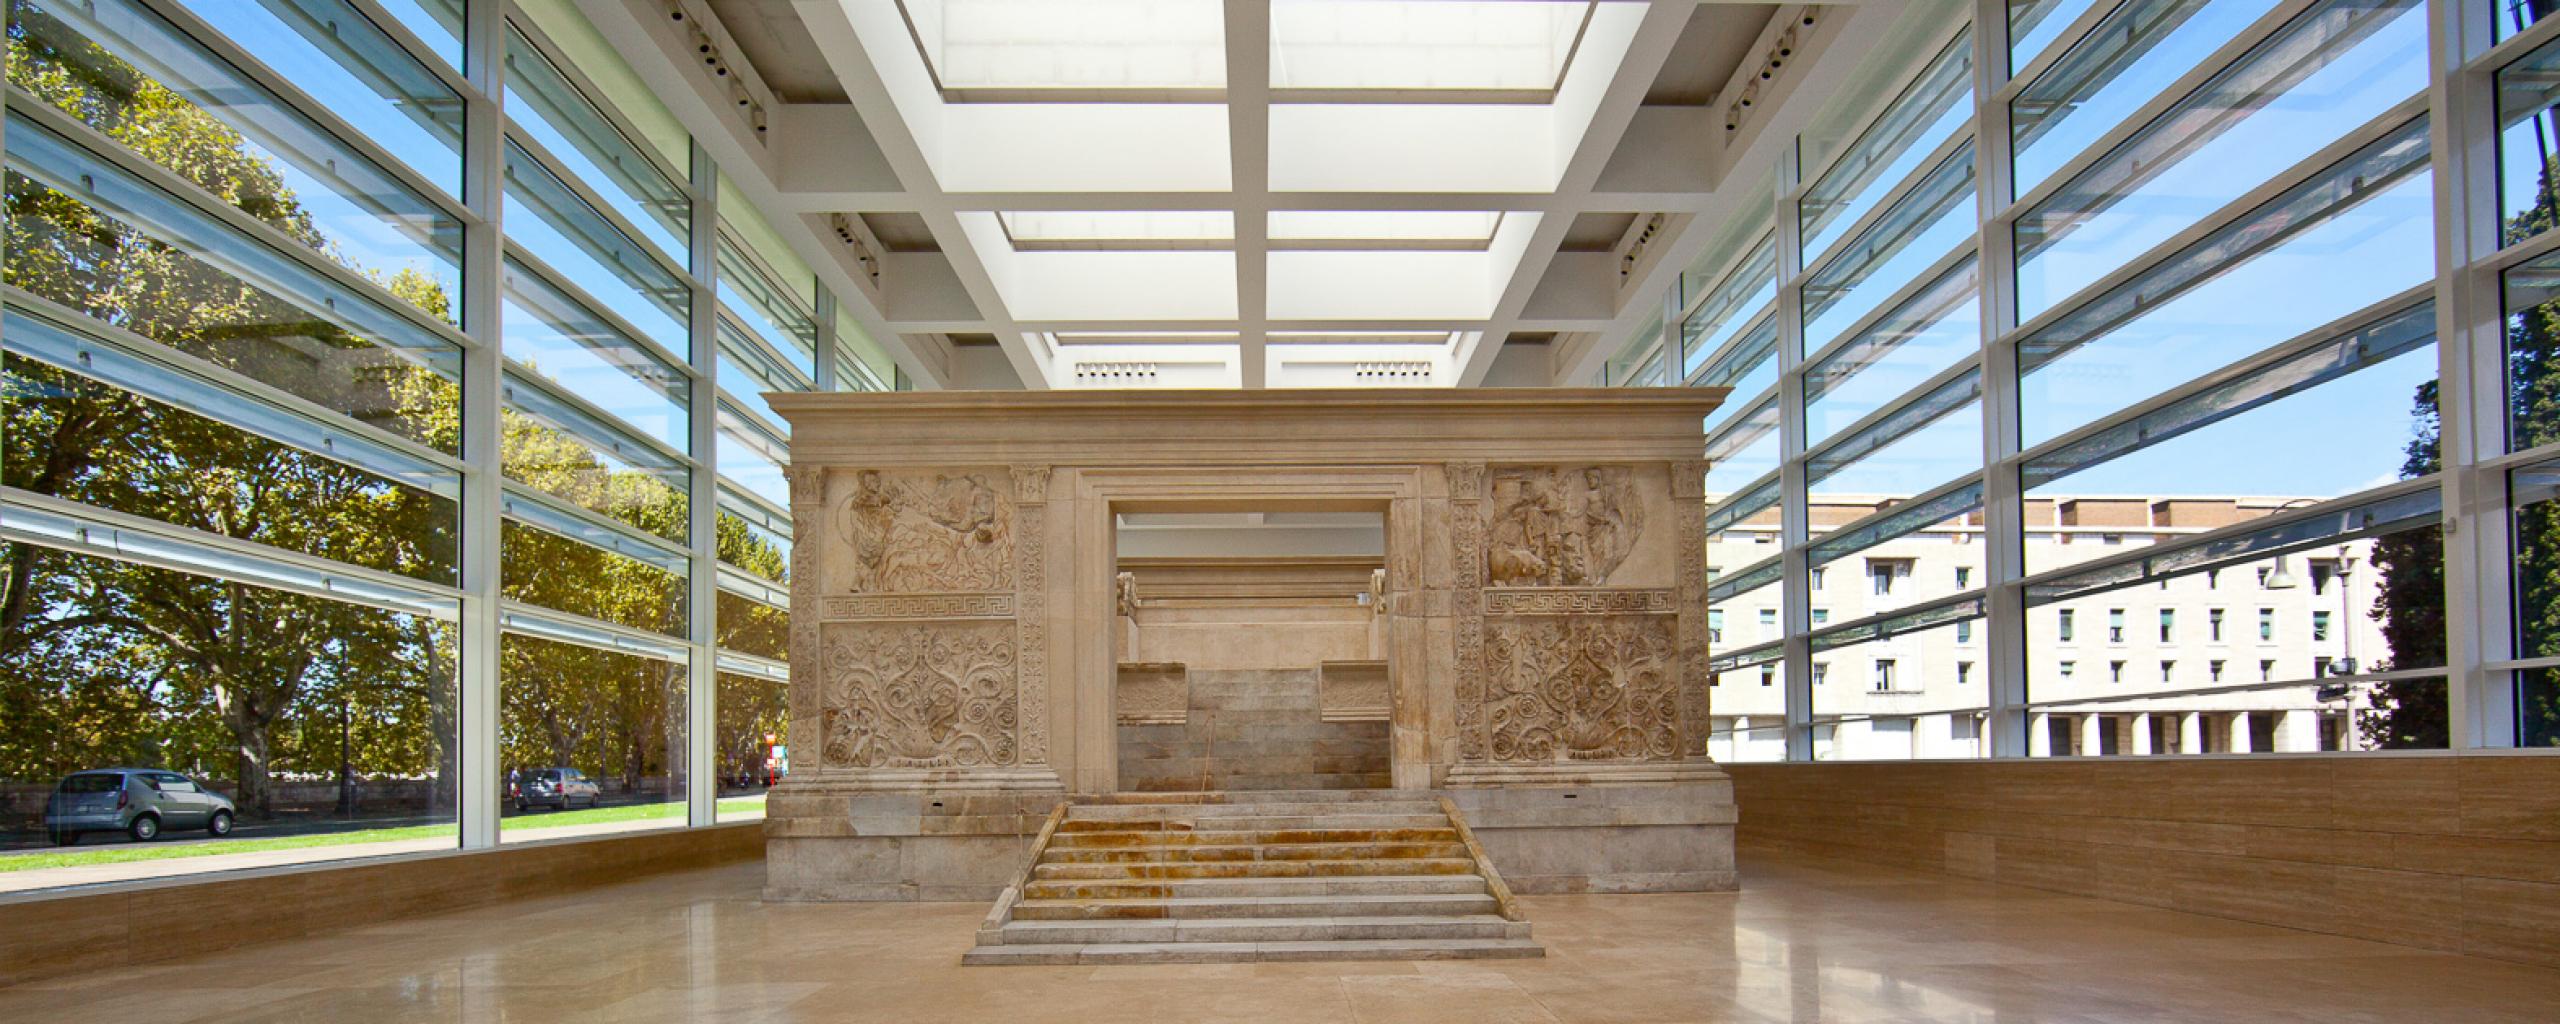 Museo dell' Ara Pacis